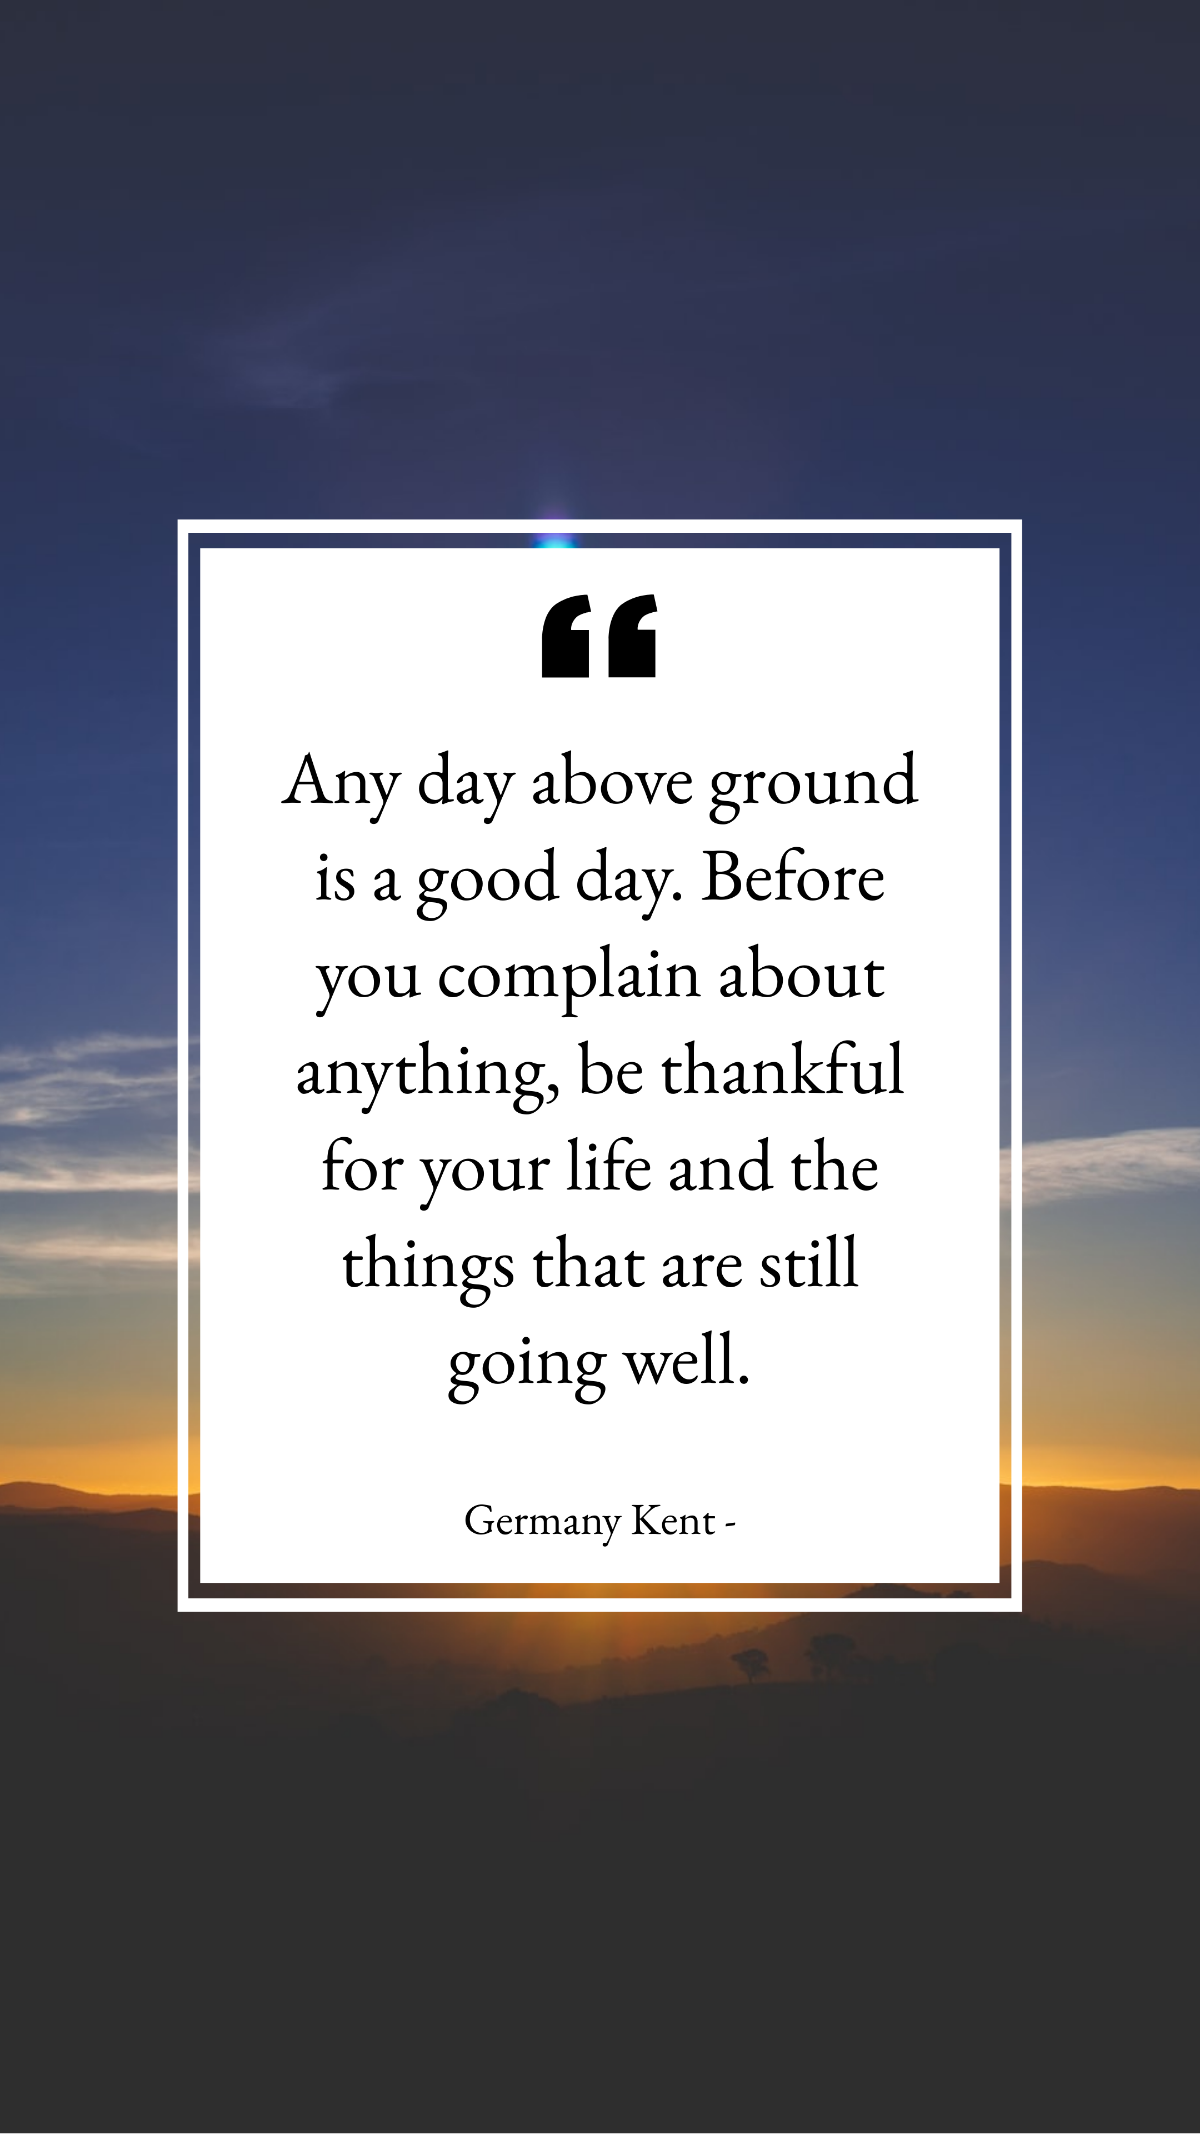 Germany Kent -Any day above ground is a good day. Before you complain about anything, be thankful for your life and the things that are still going well. Template